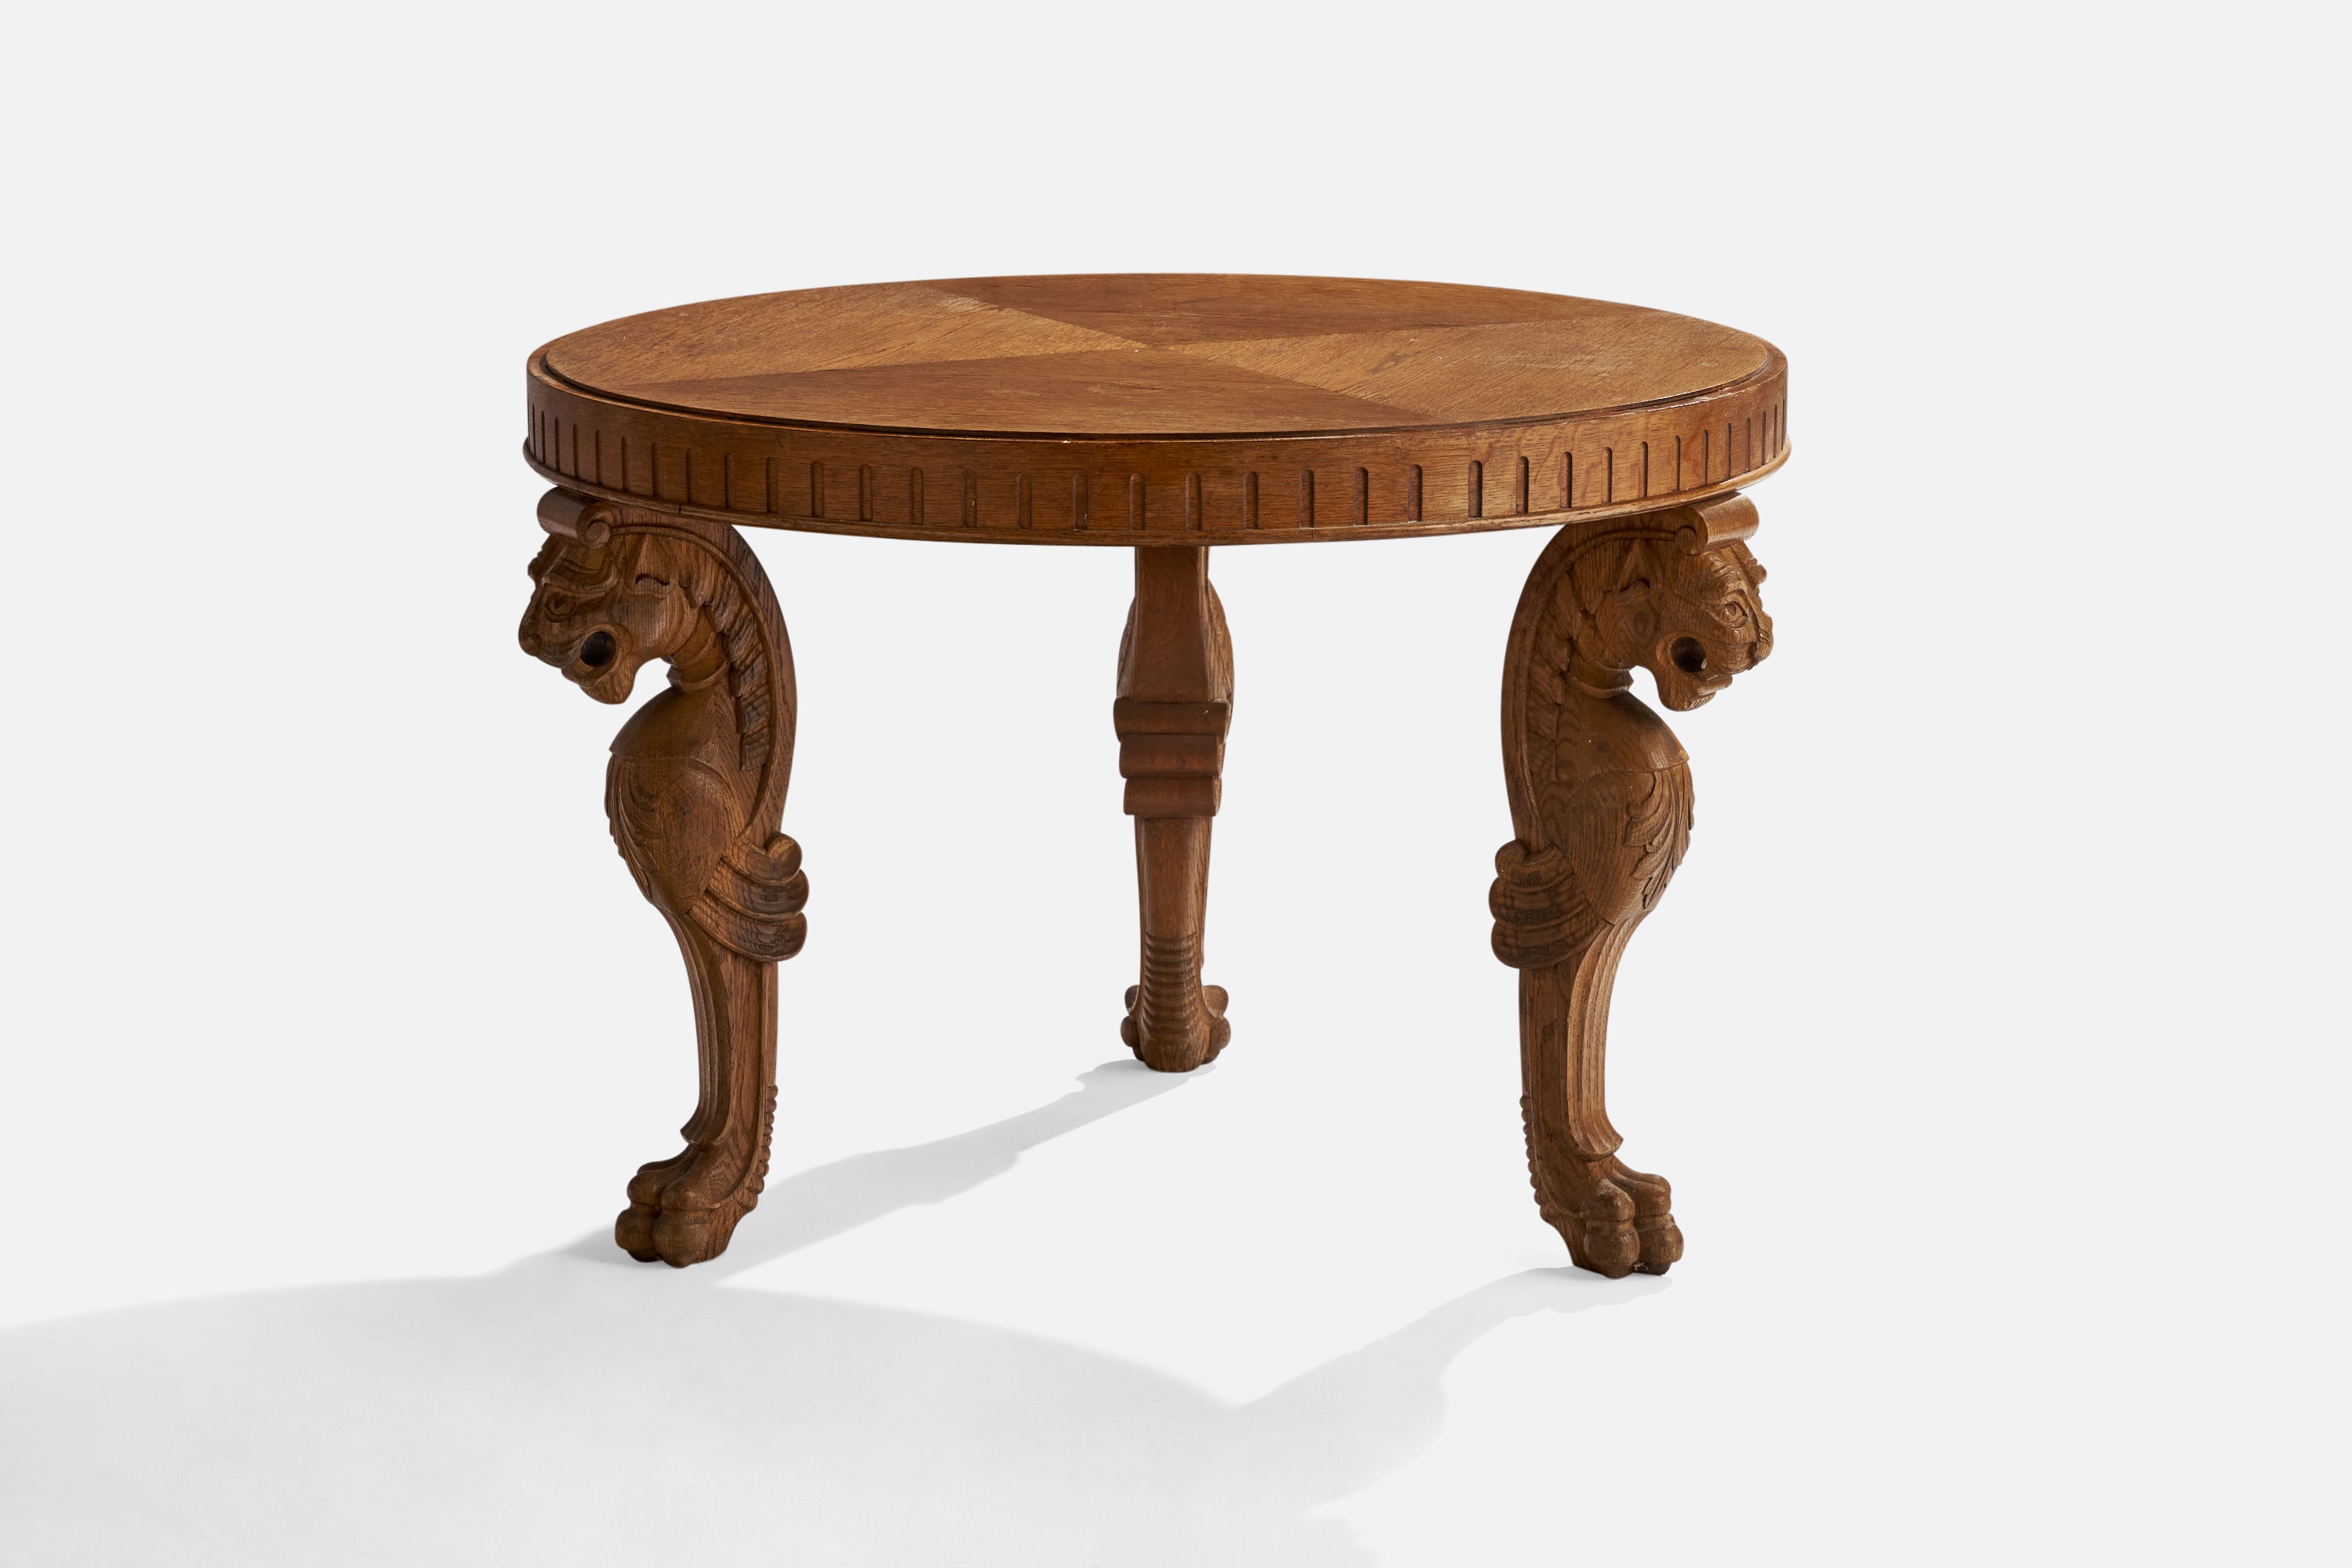 A carved and veneered elm side table or coffee table designed and produced in Sweden, 1920s.